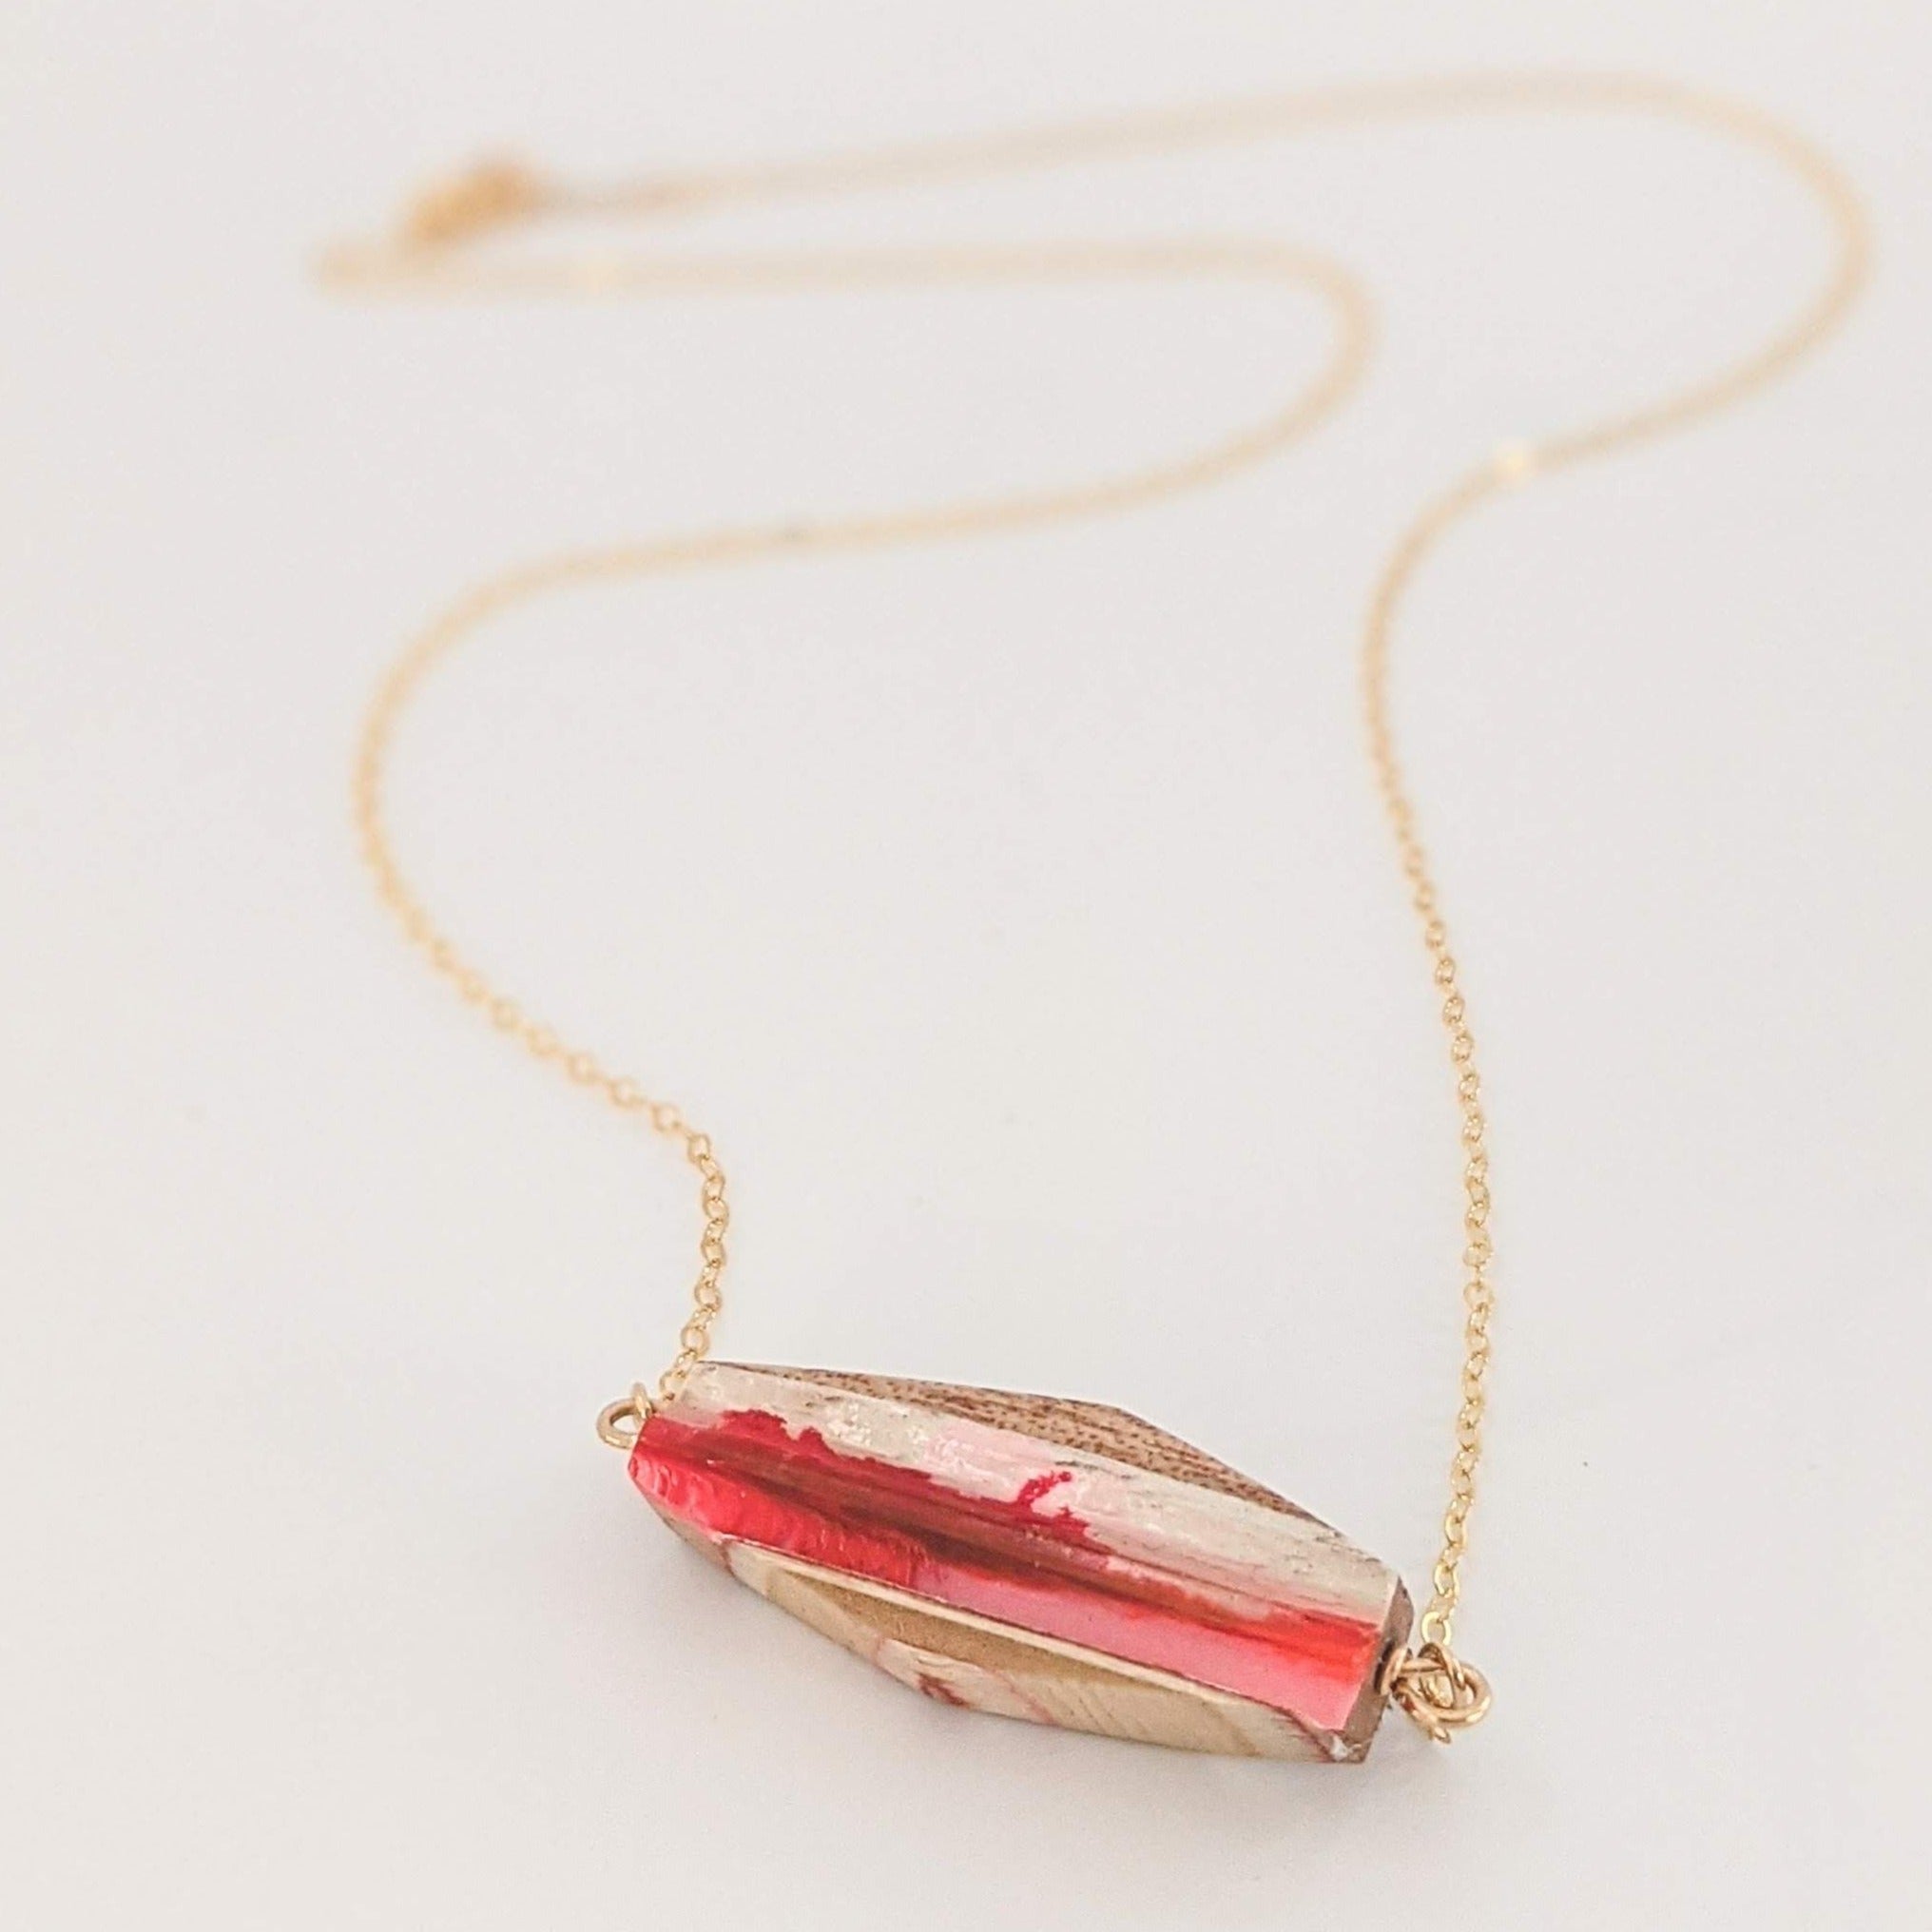 Red Horizon Hand Painted necklace. Organic shape